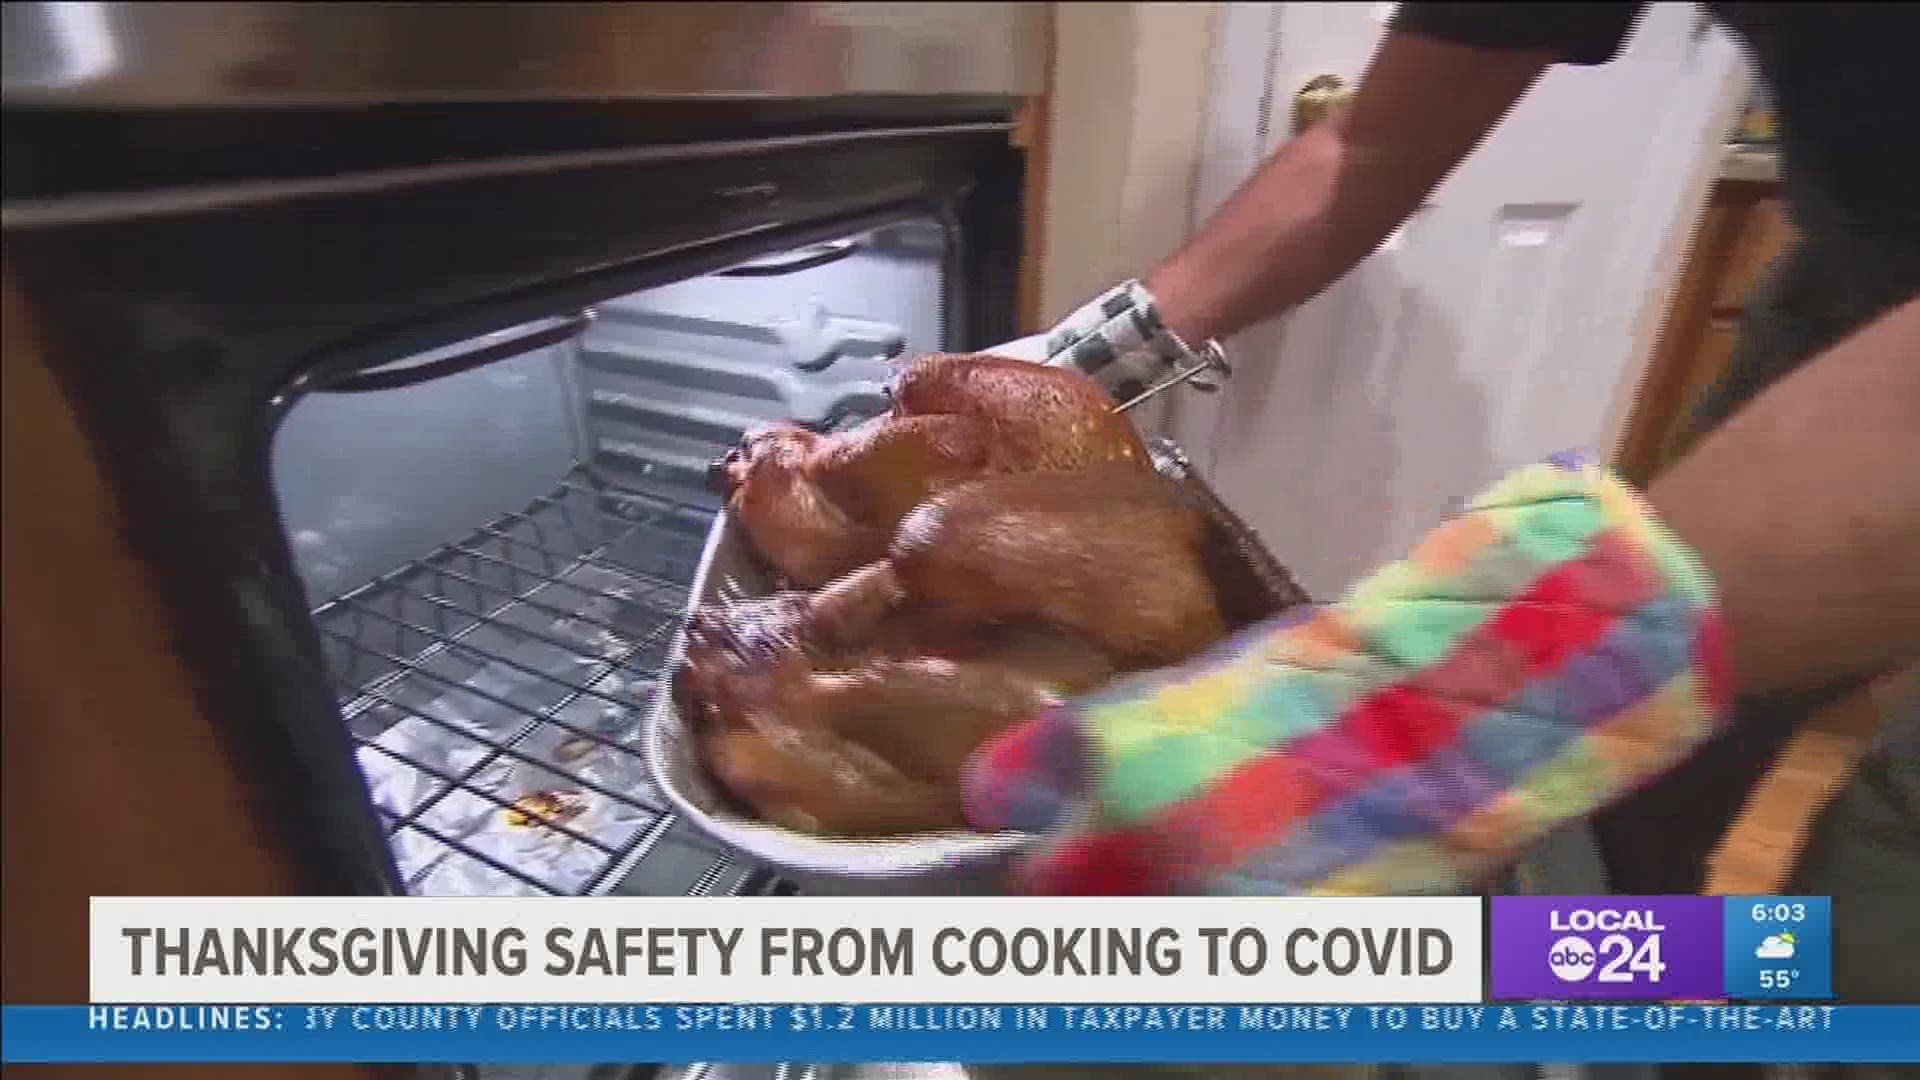 Not only are we dealing with a pandemic this Thanksgiving. The holiday is also number one for cooking fires in the U.S.